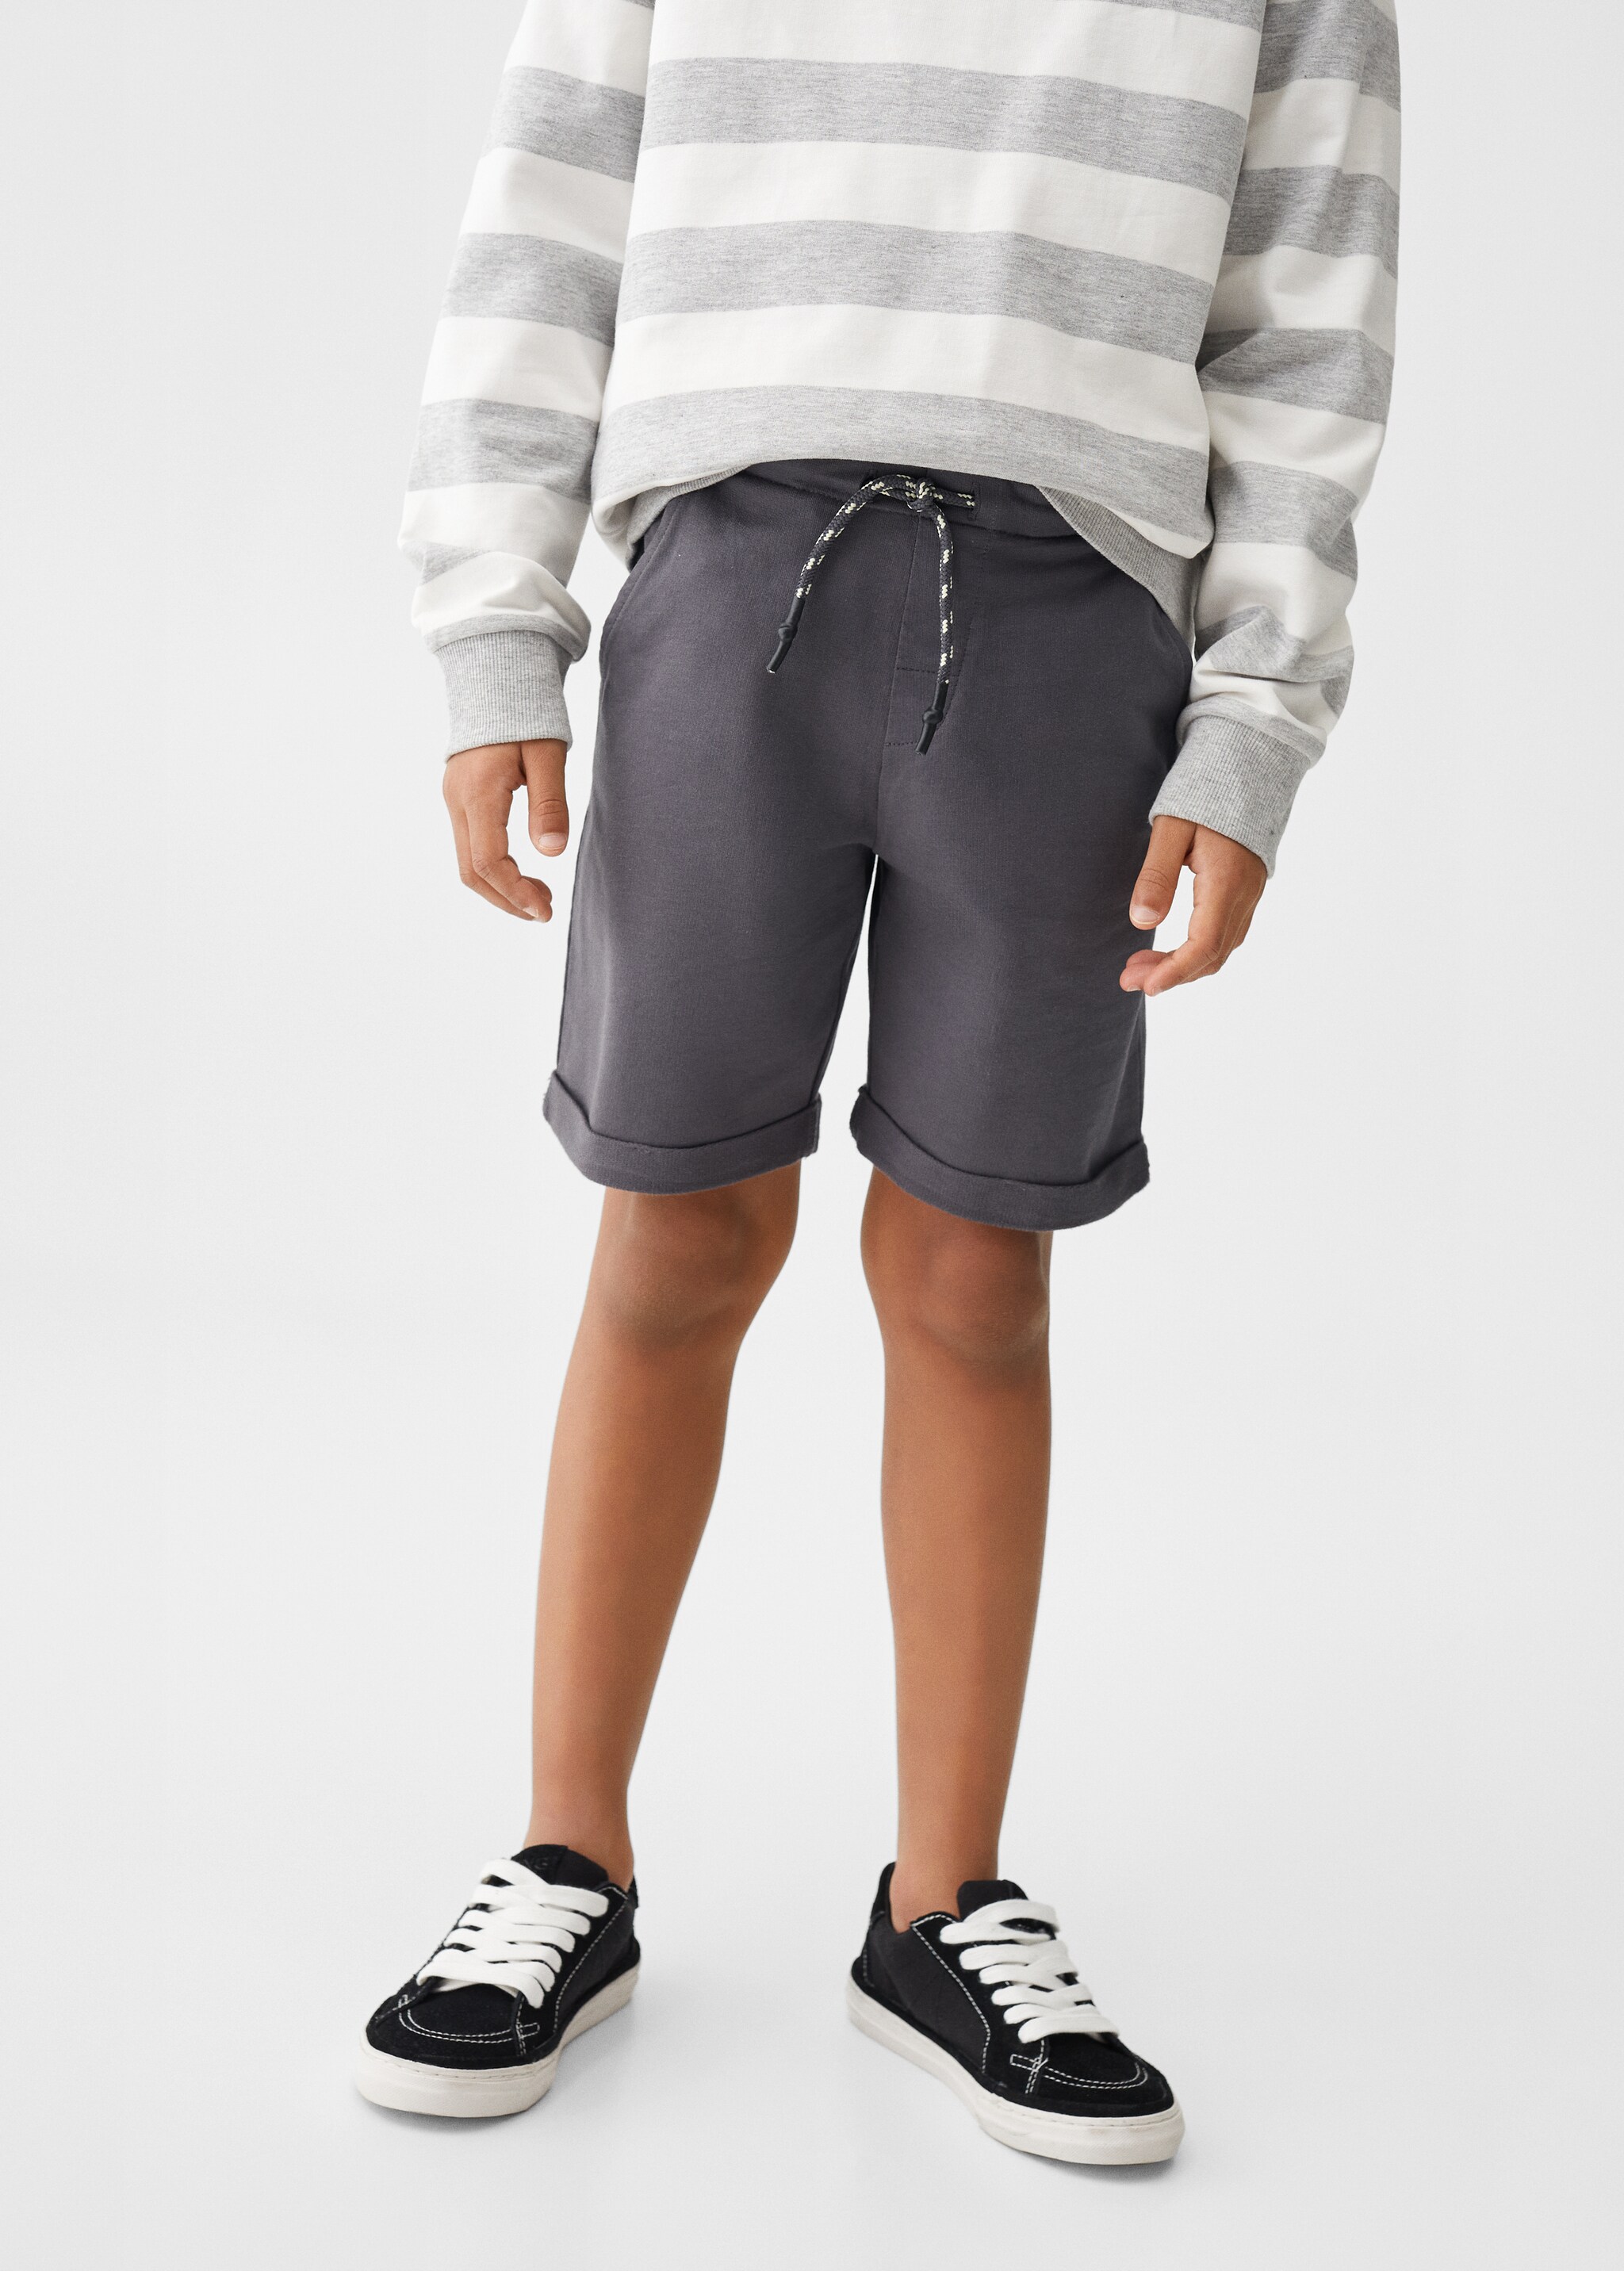 Cotton Bermuda shorts - Details of the article 6